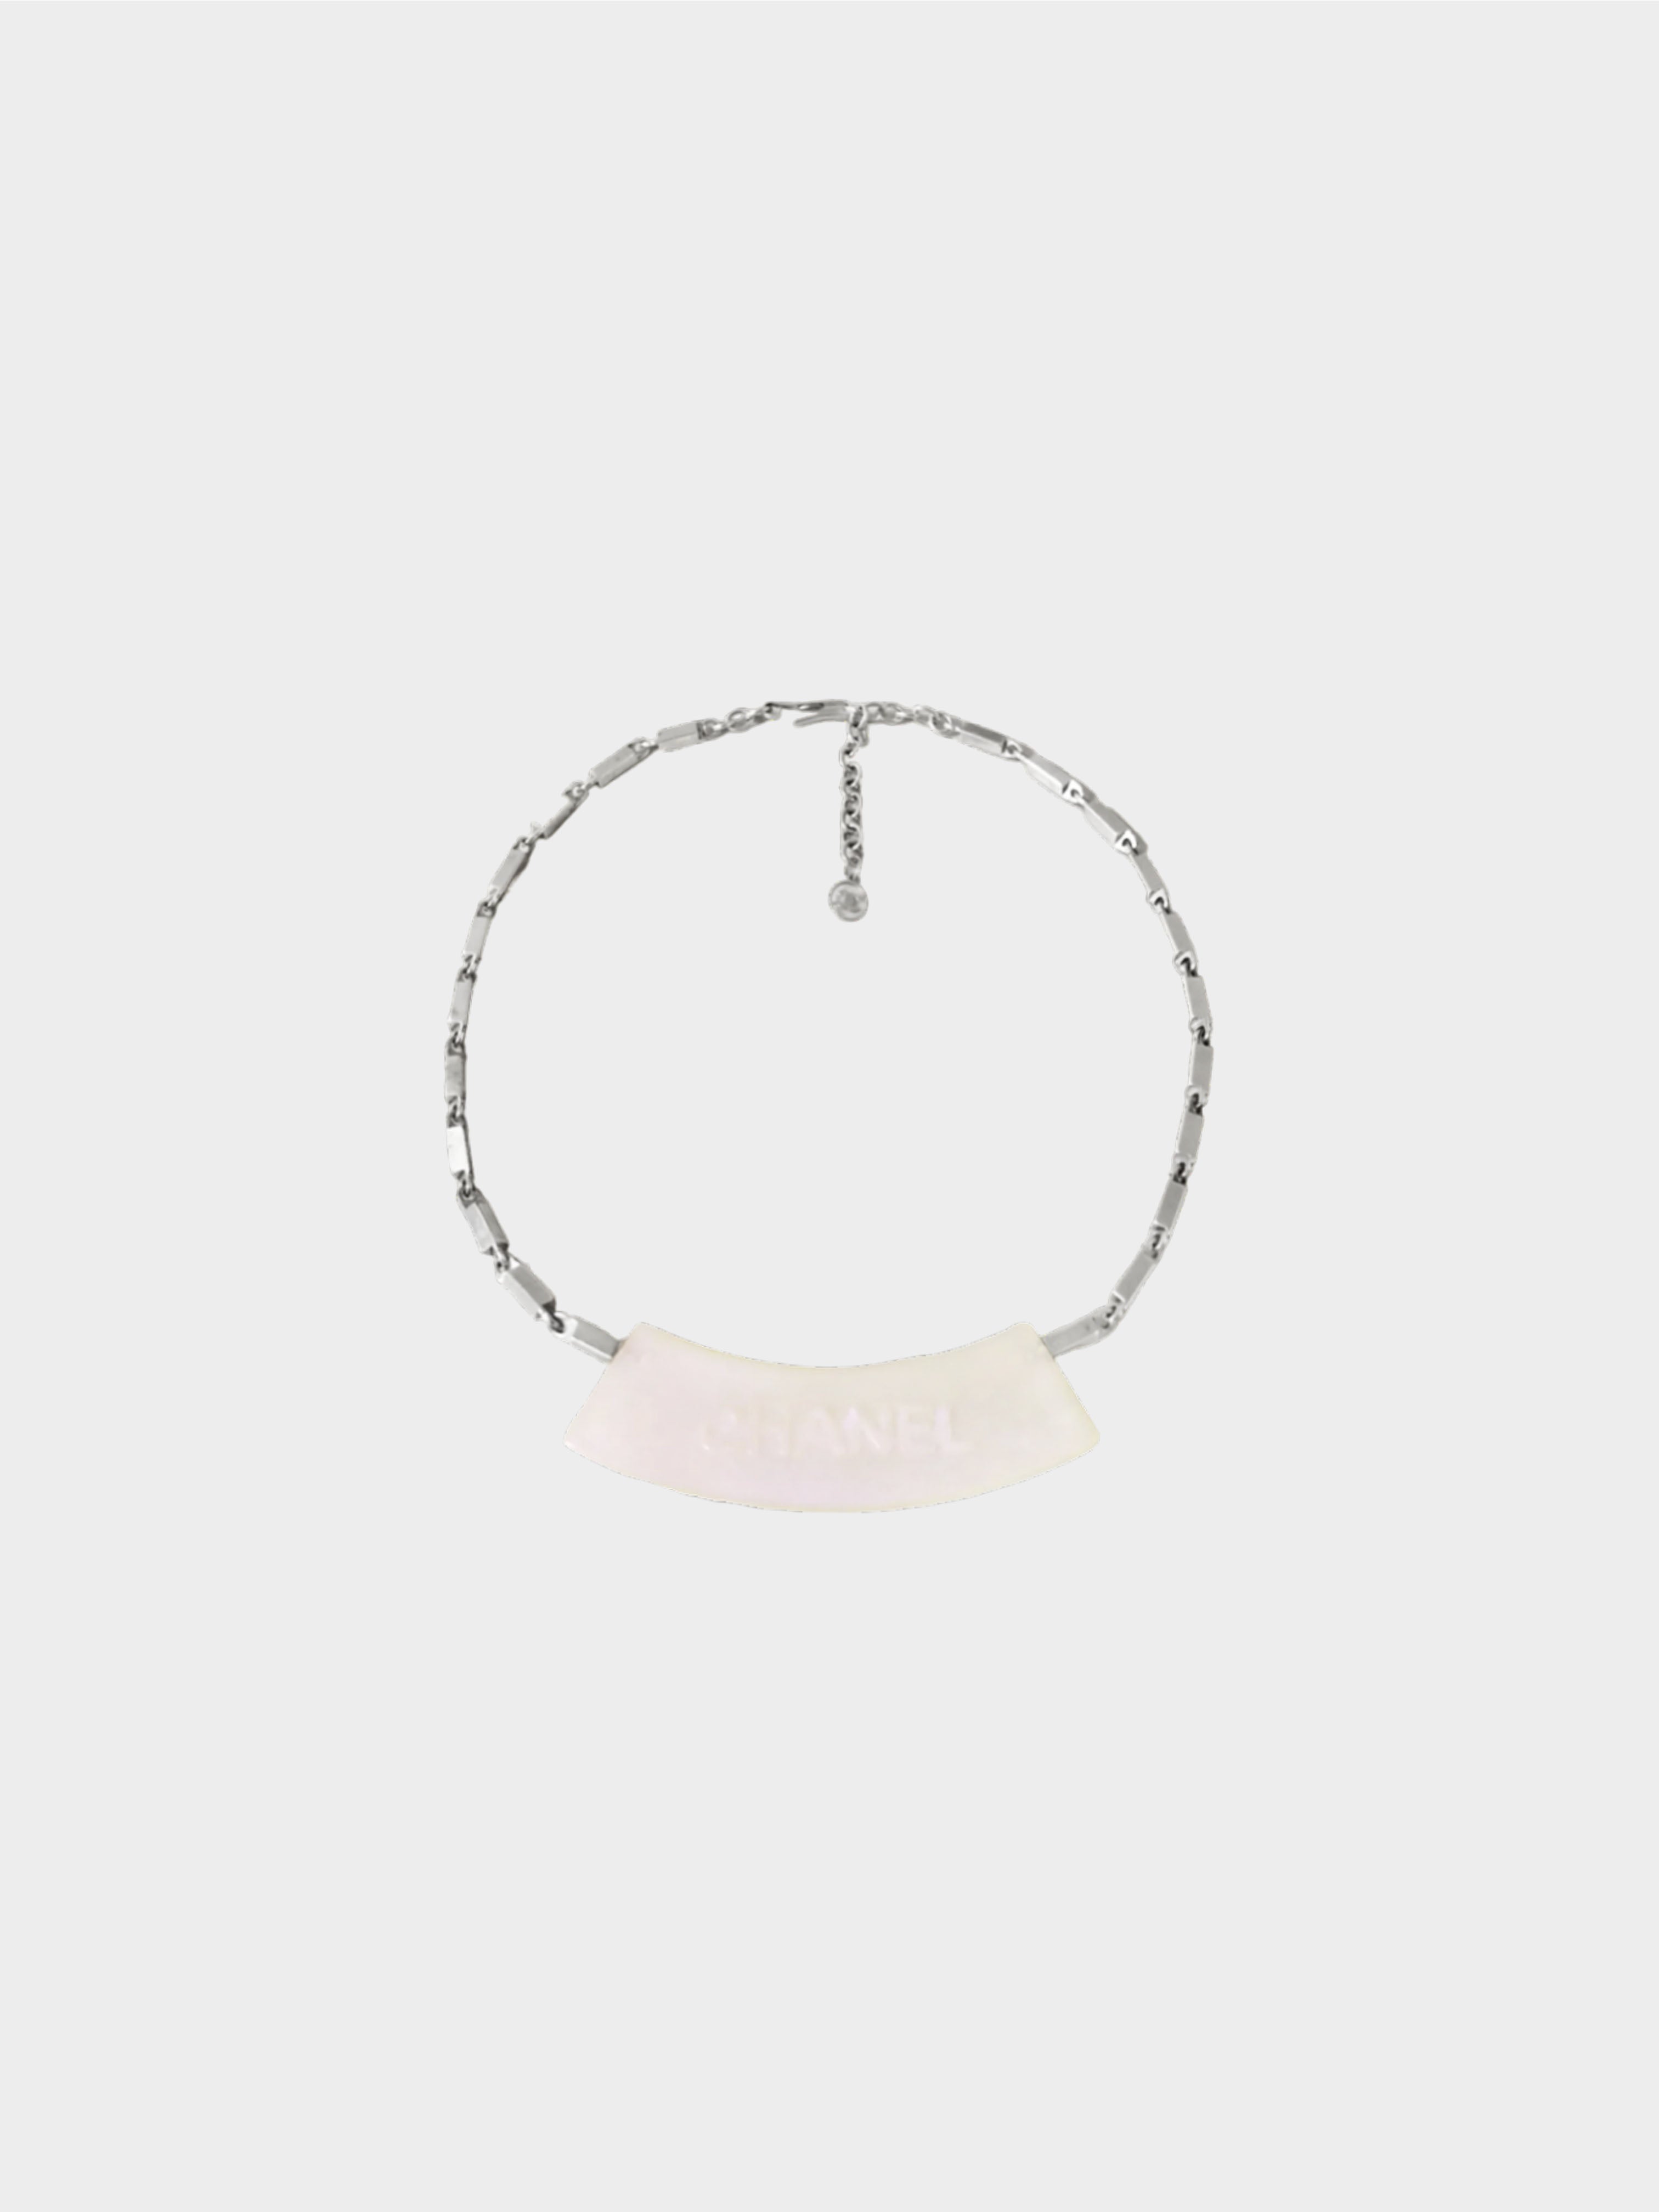 Chanel Early 2000s Silver and Opalescent Shell Pendant Necklace